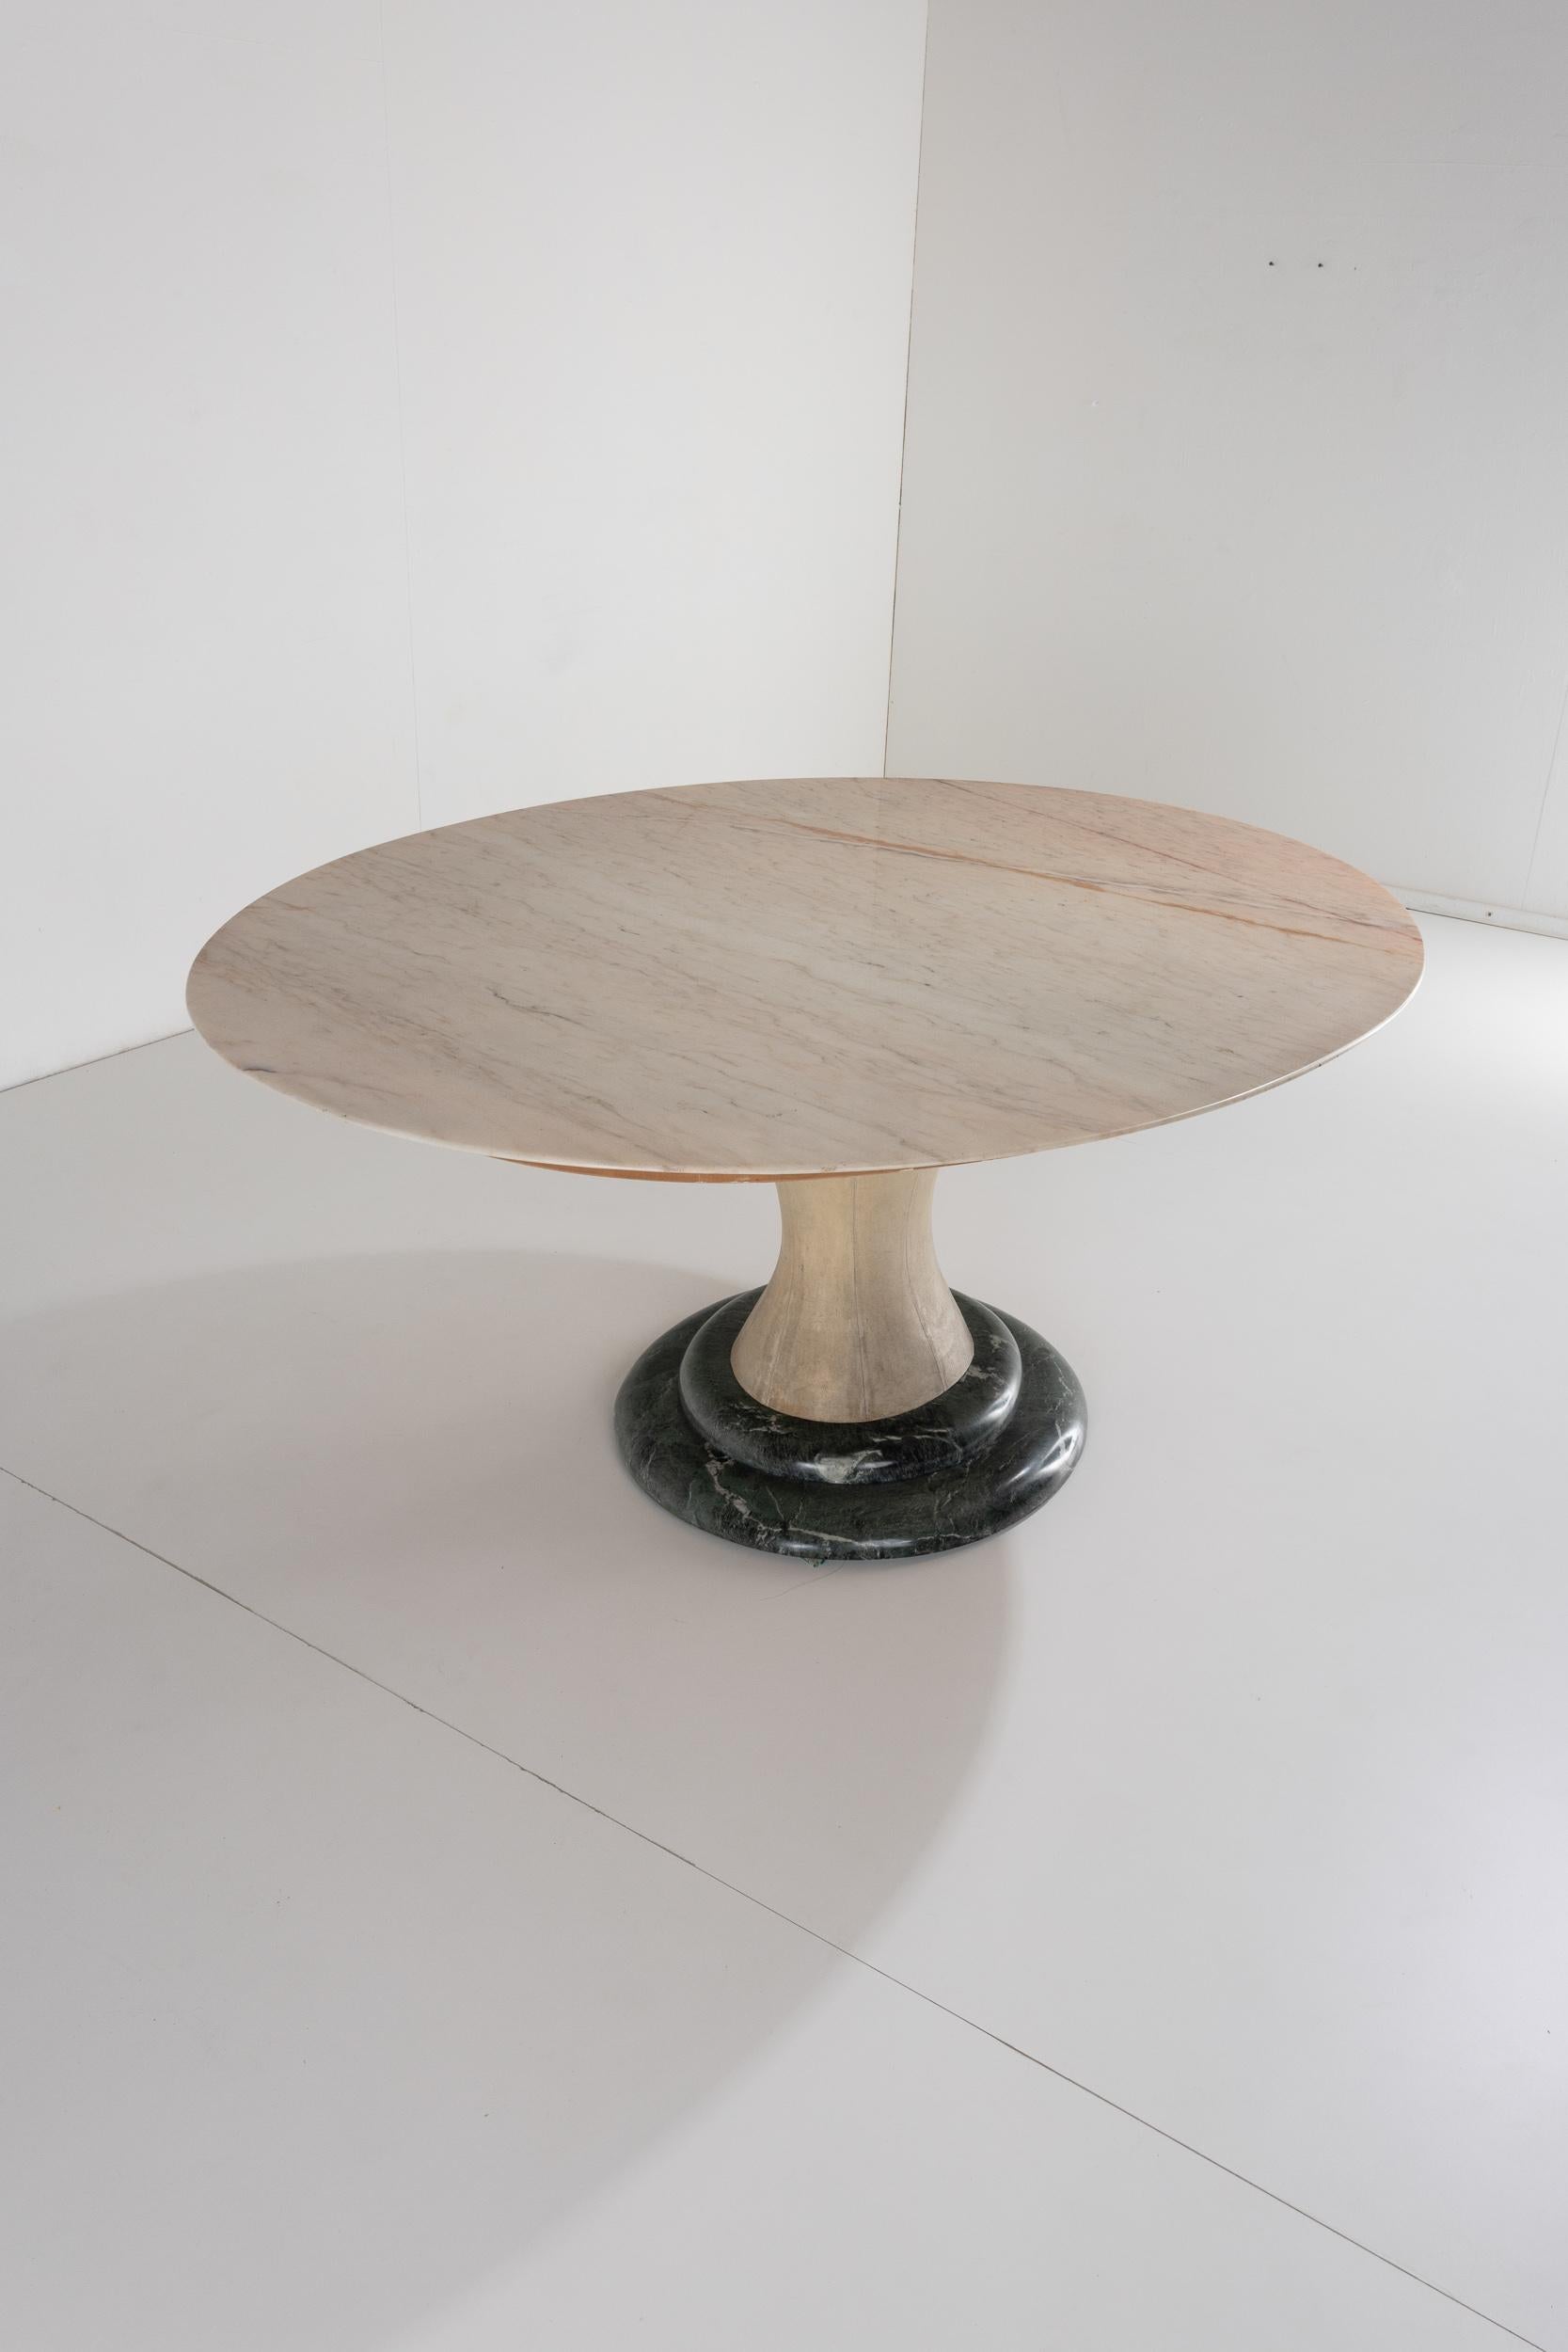 Guglielmo Ulrich Parchemin table with marble top. Italian design 1940s In Good Condition For Sale In Milan, IT